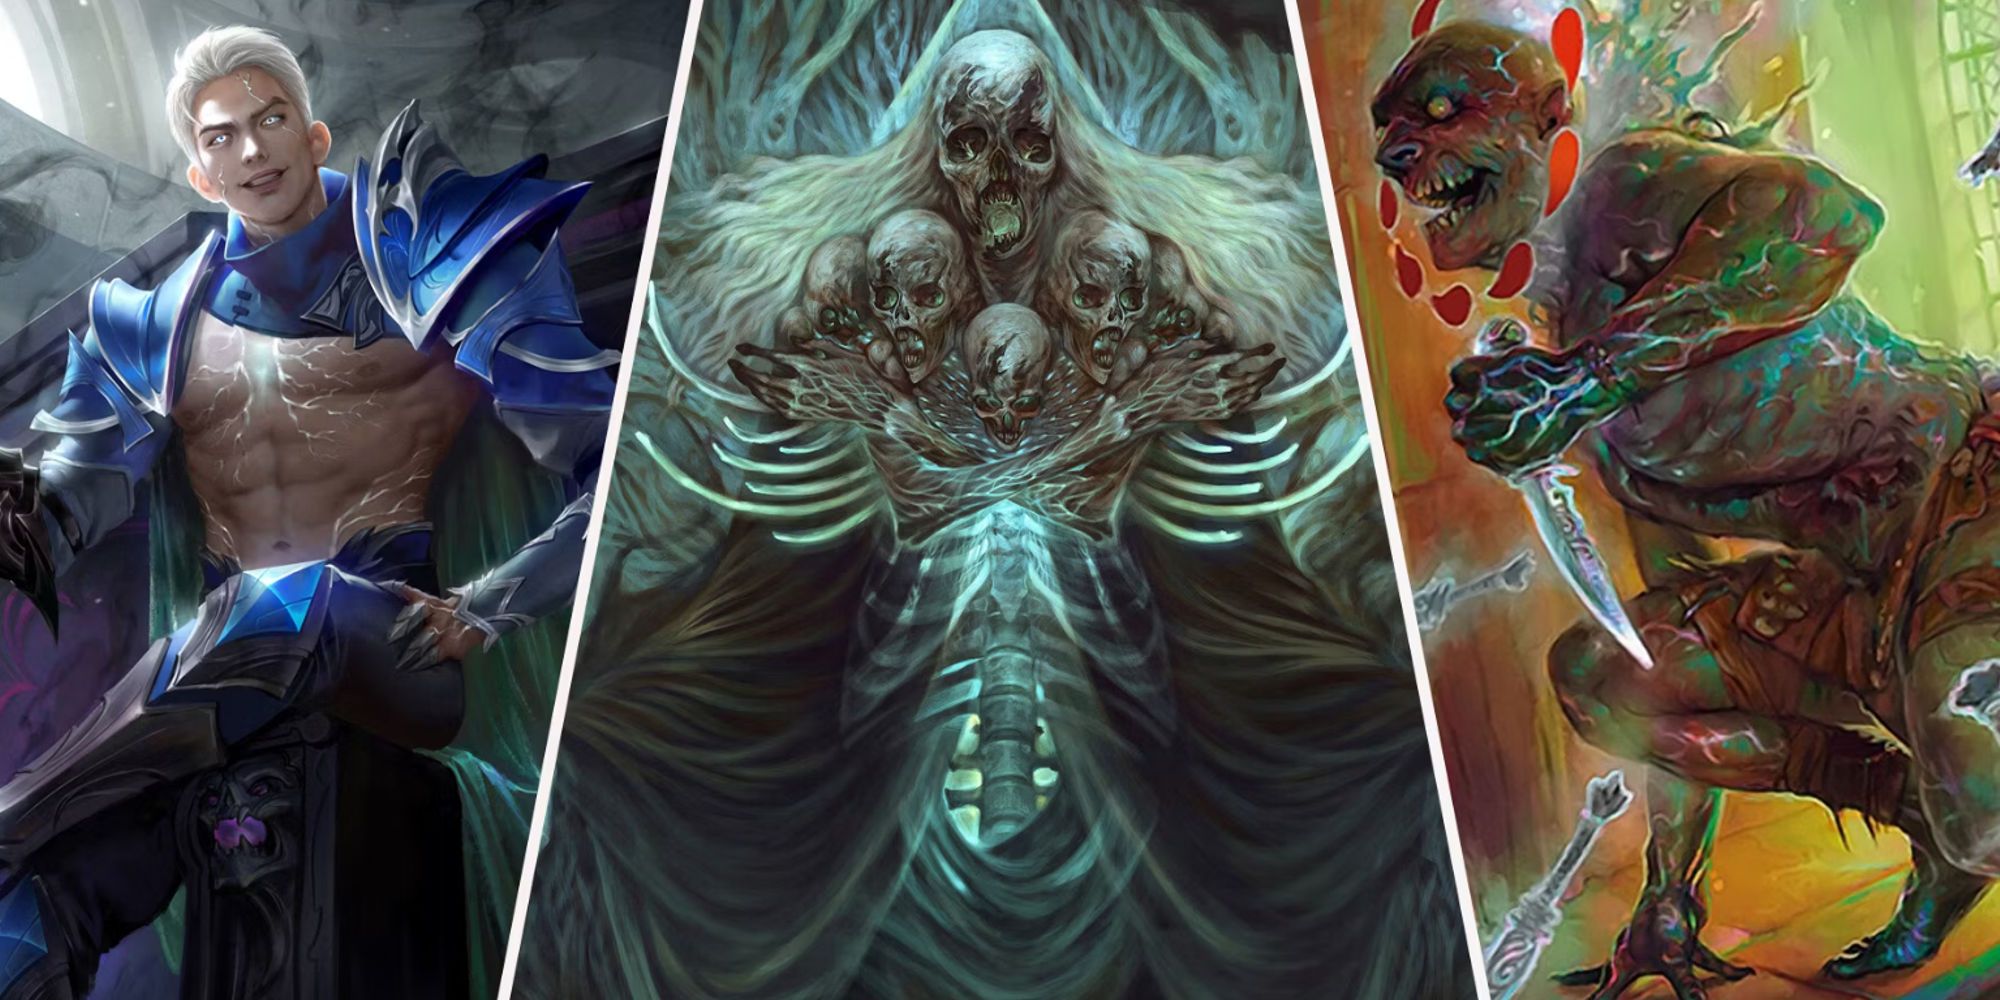 The 3 Gods of Death from Baldur's Gate; Bane, Myrkul, And Bhaal